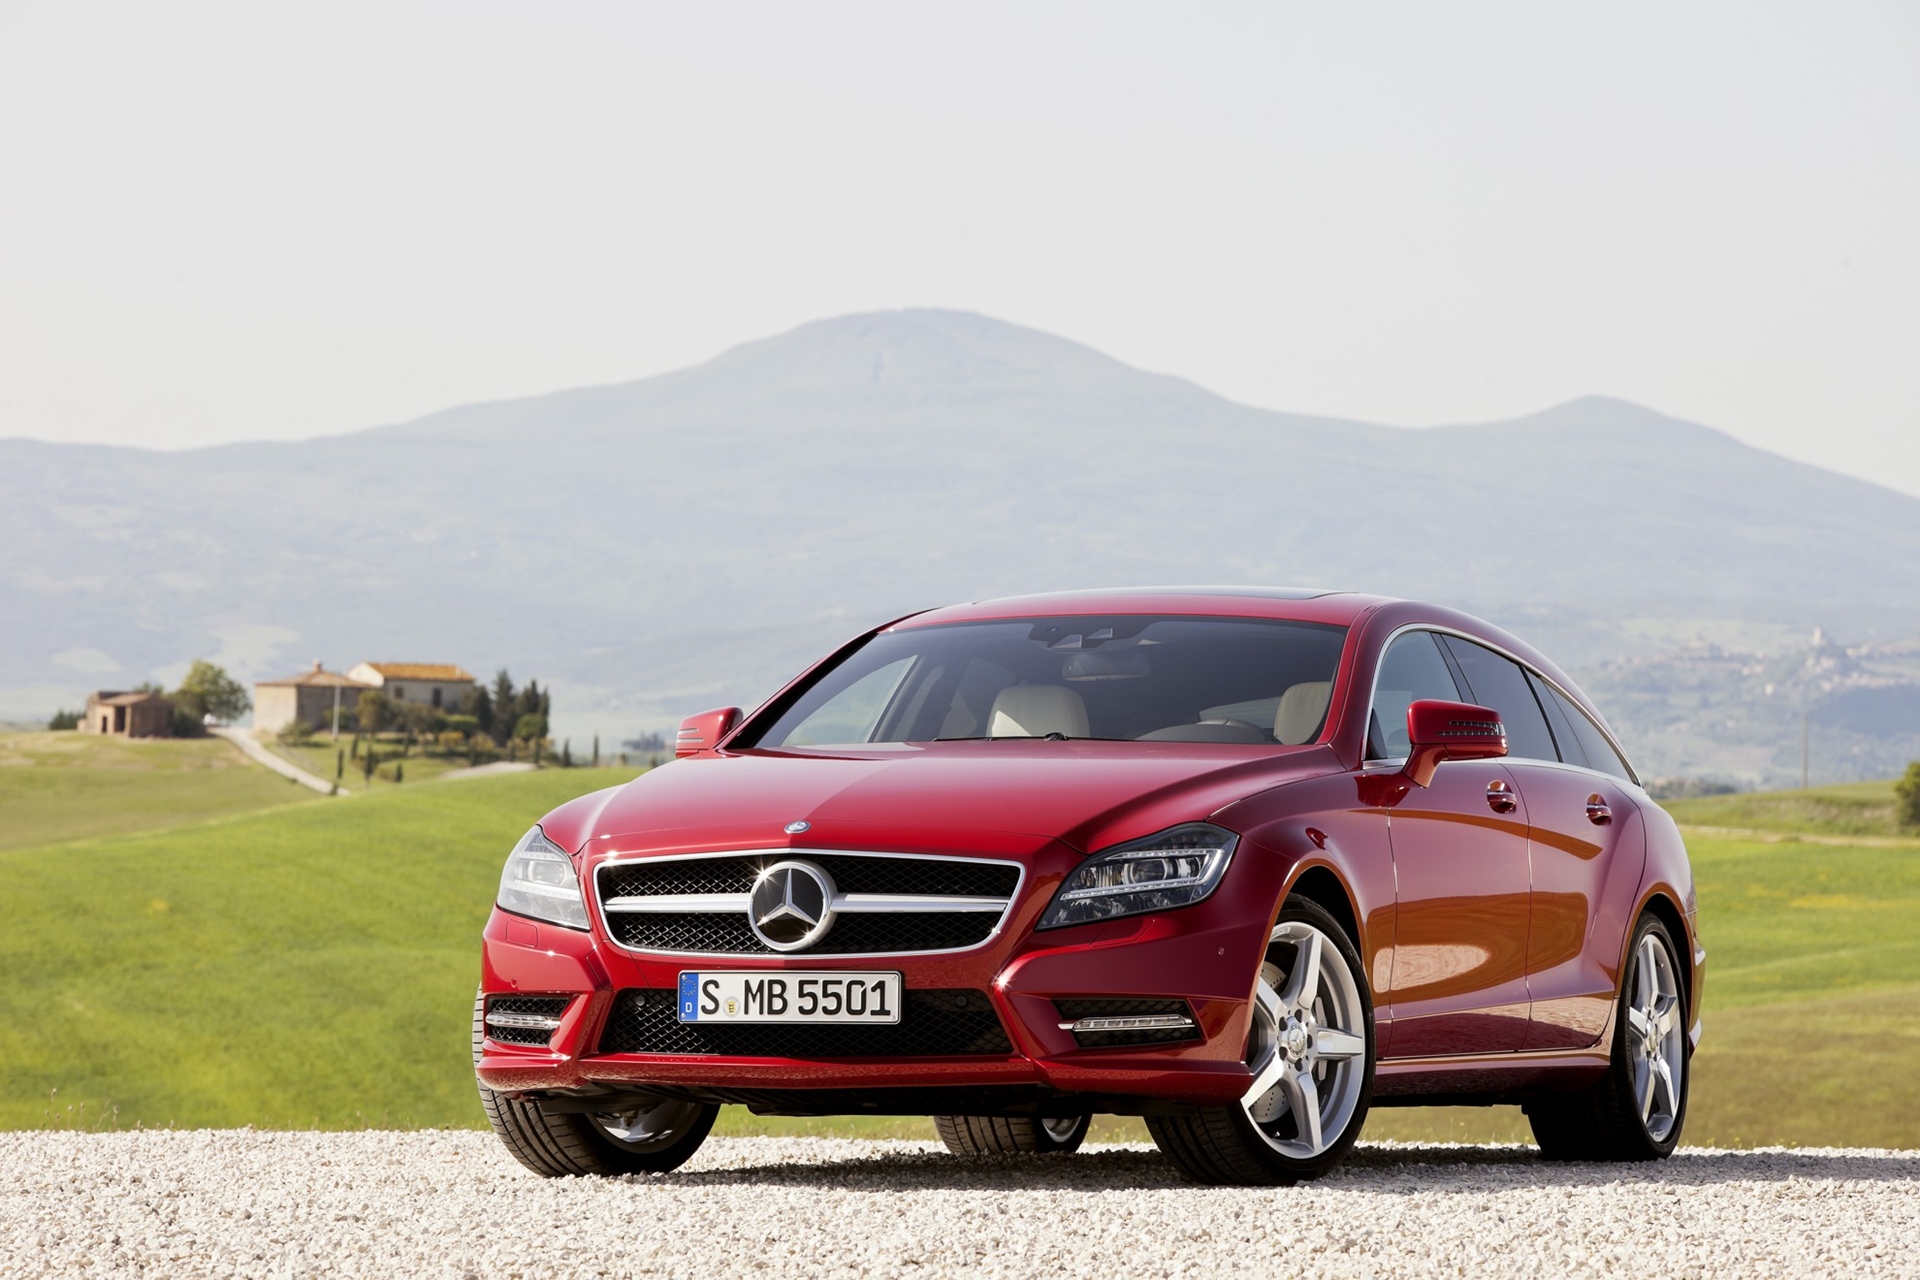 Mercedes-Benz CLS Shooting Brake: Robust, light and streamlined